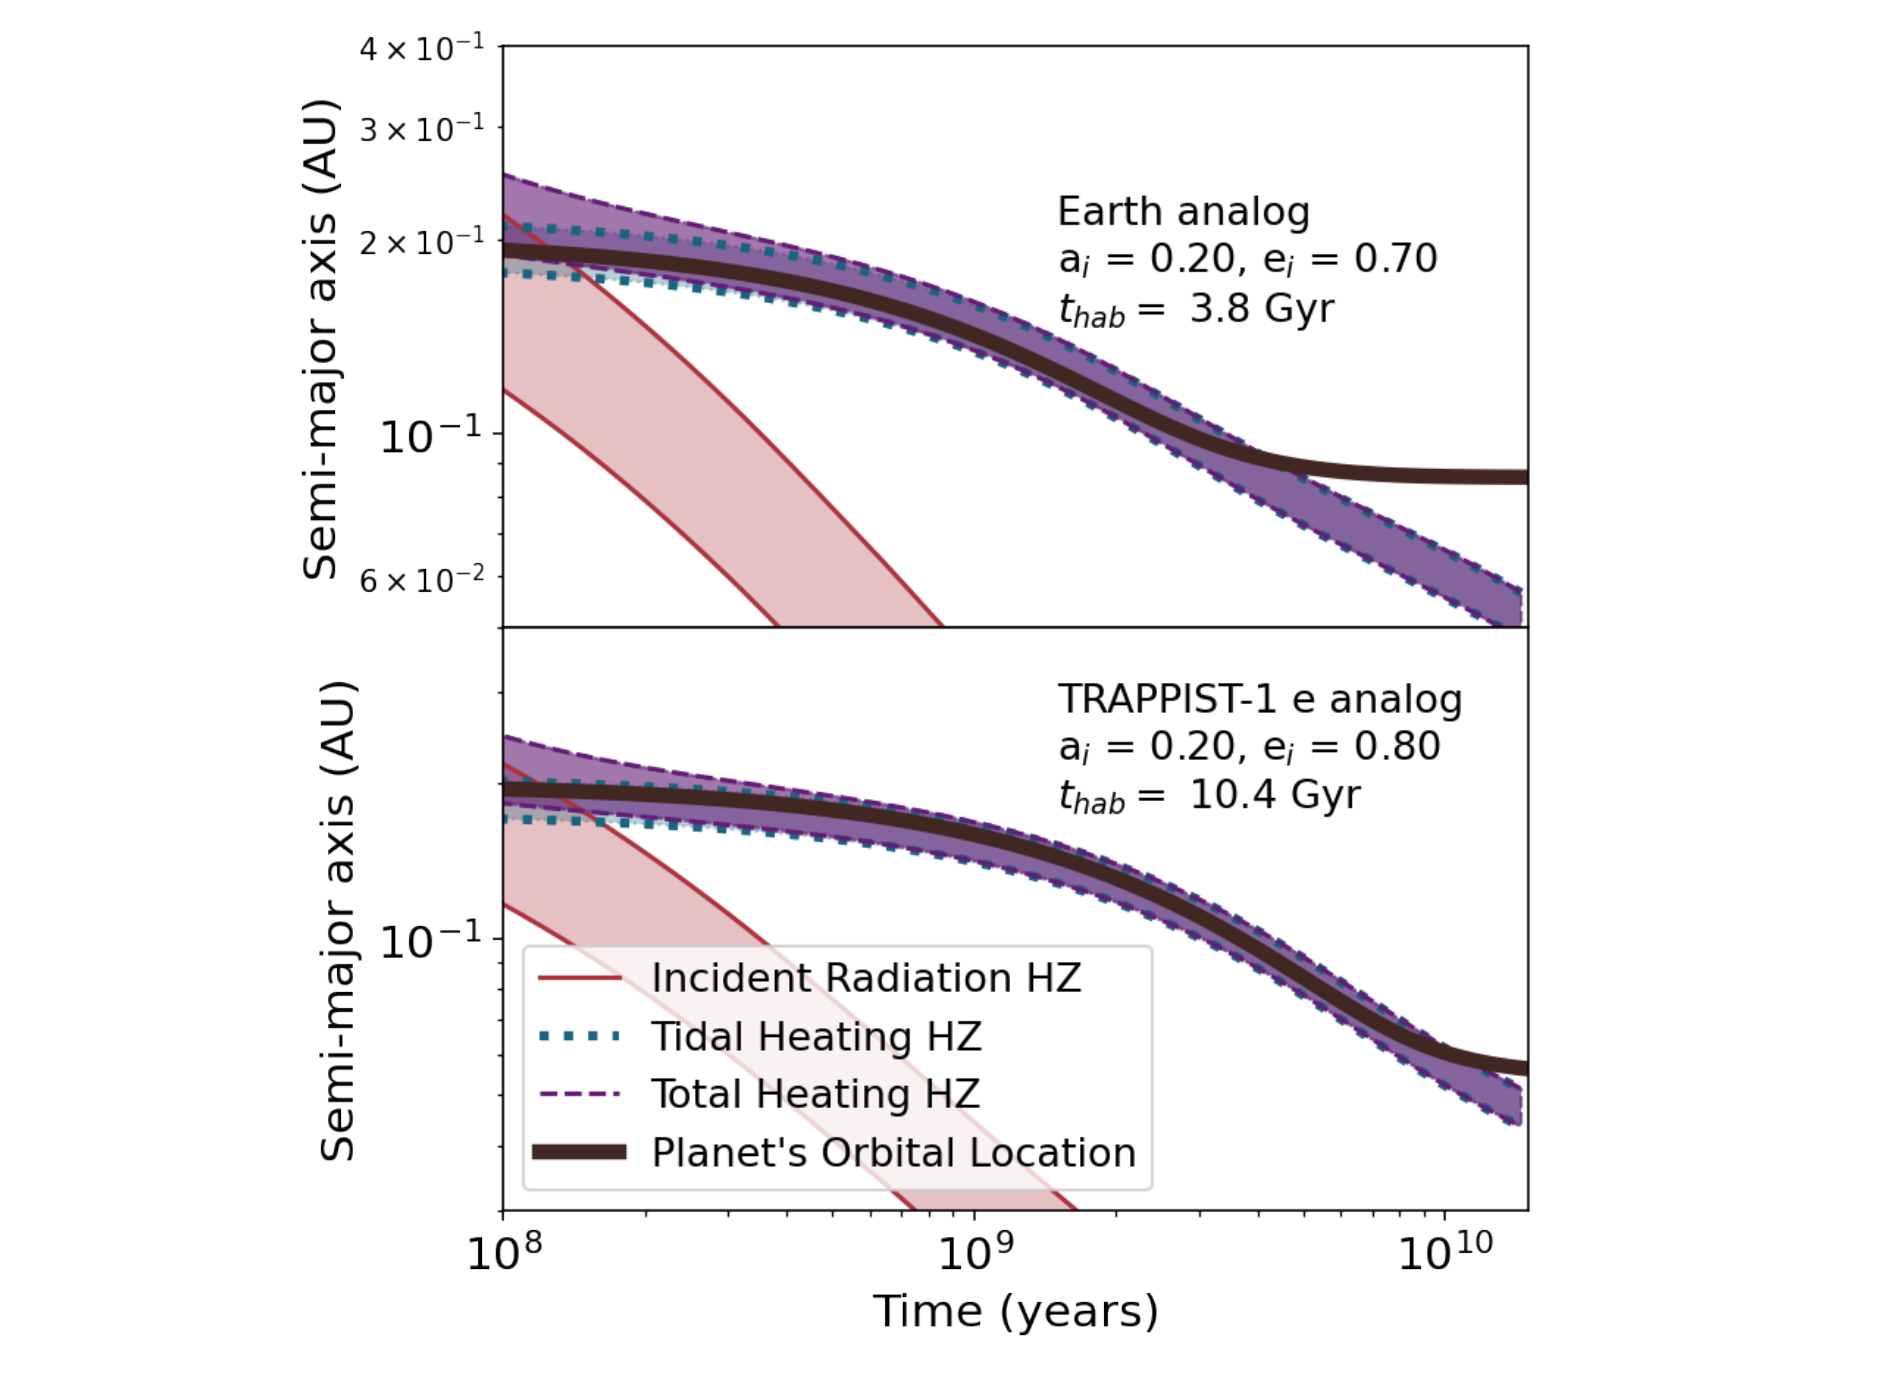 The Influence Of Tidal Heating On The Habitability Of Planets Orbiting White Dwarfs